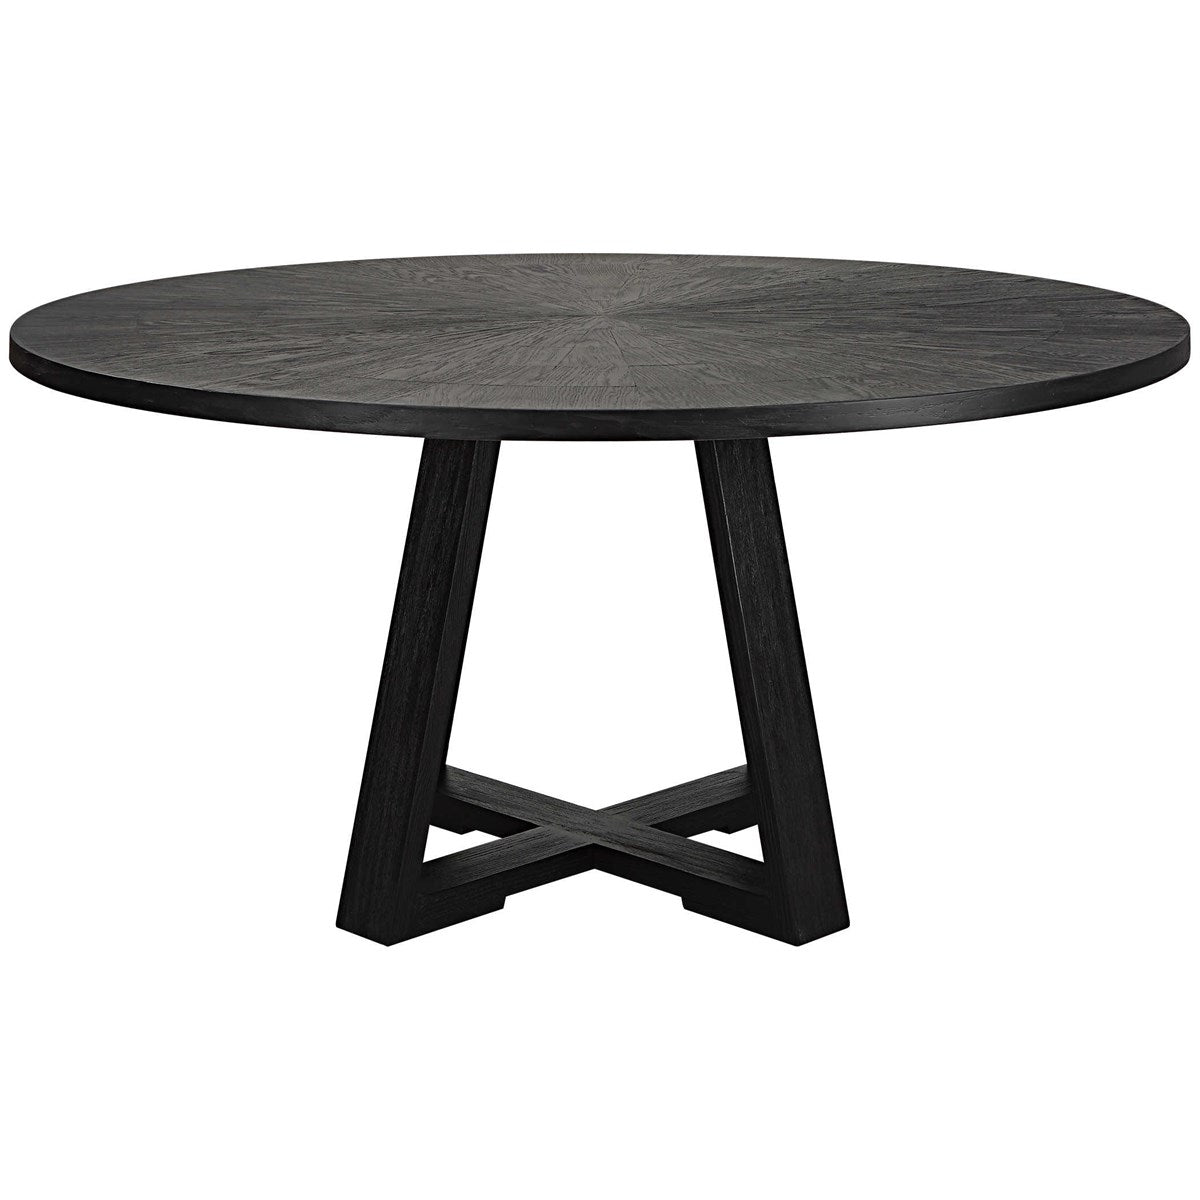 Carran Charcoal Black Dining Table